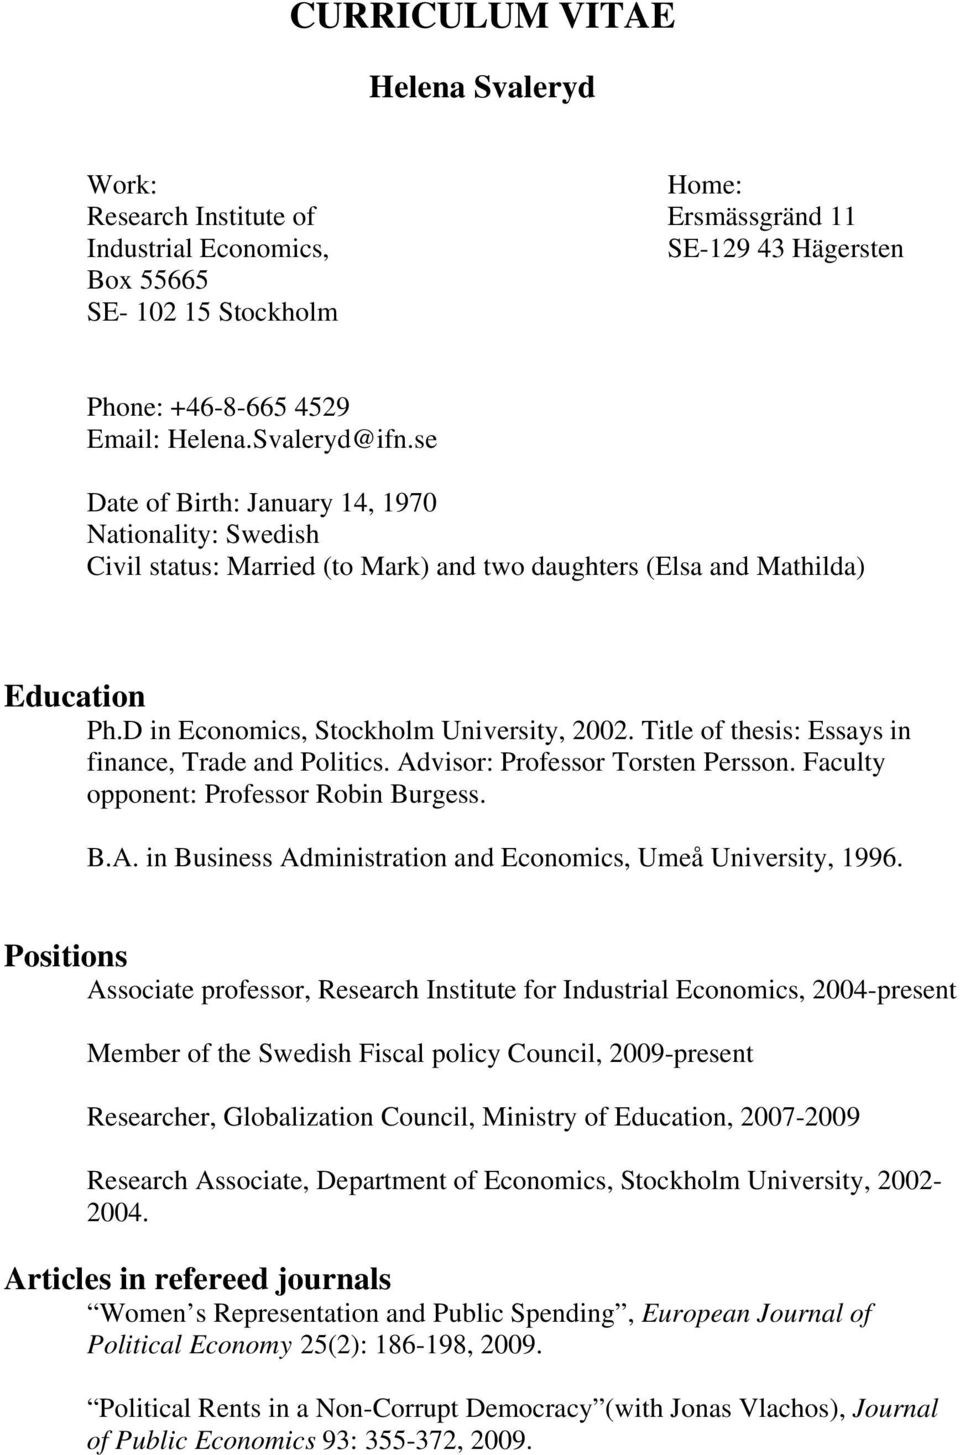 Title of thesis: Essays in finance, Trade and Politics. Advisor: Professor Torsten Persson. Faculty opponent: Professor Robin Burgess. B.A. in Business Administration and Economics, Umeå University, 1996.